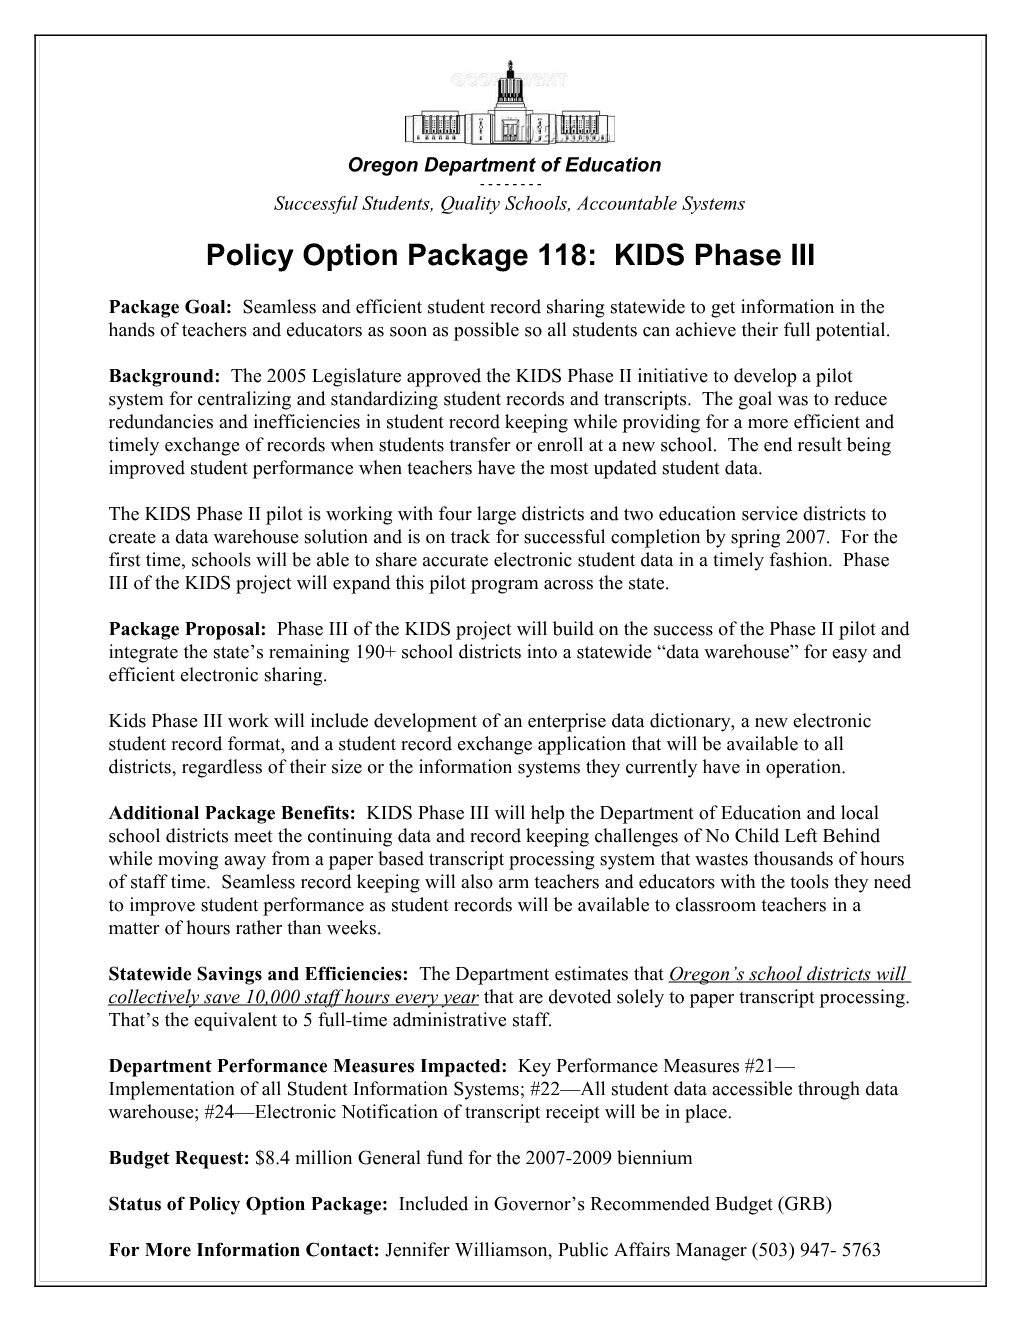 KIDS III Policy Option Package 118